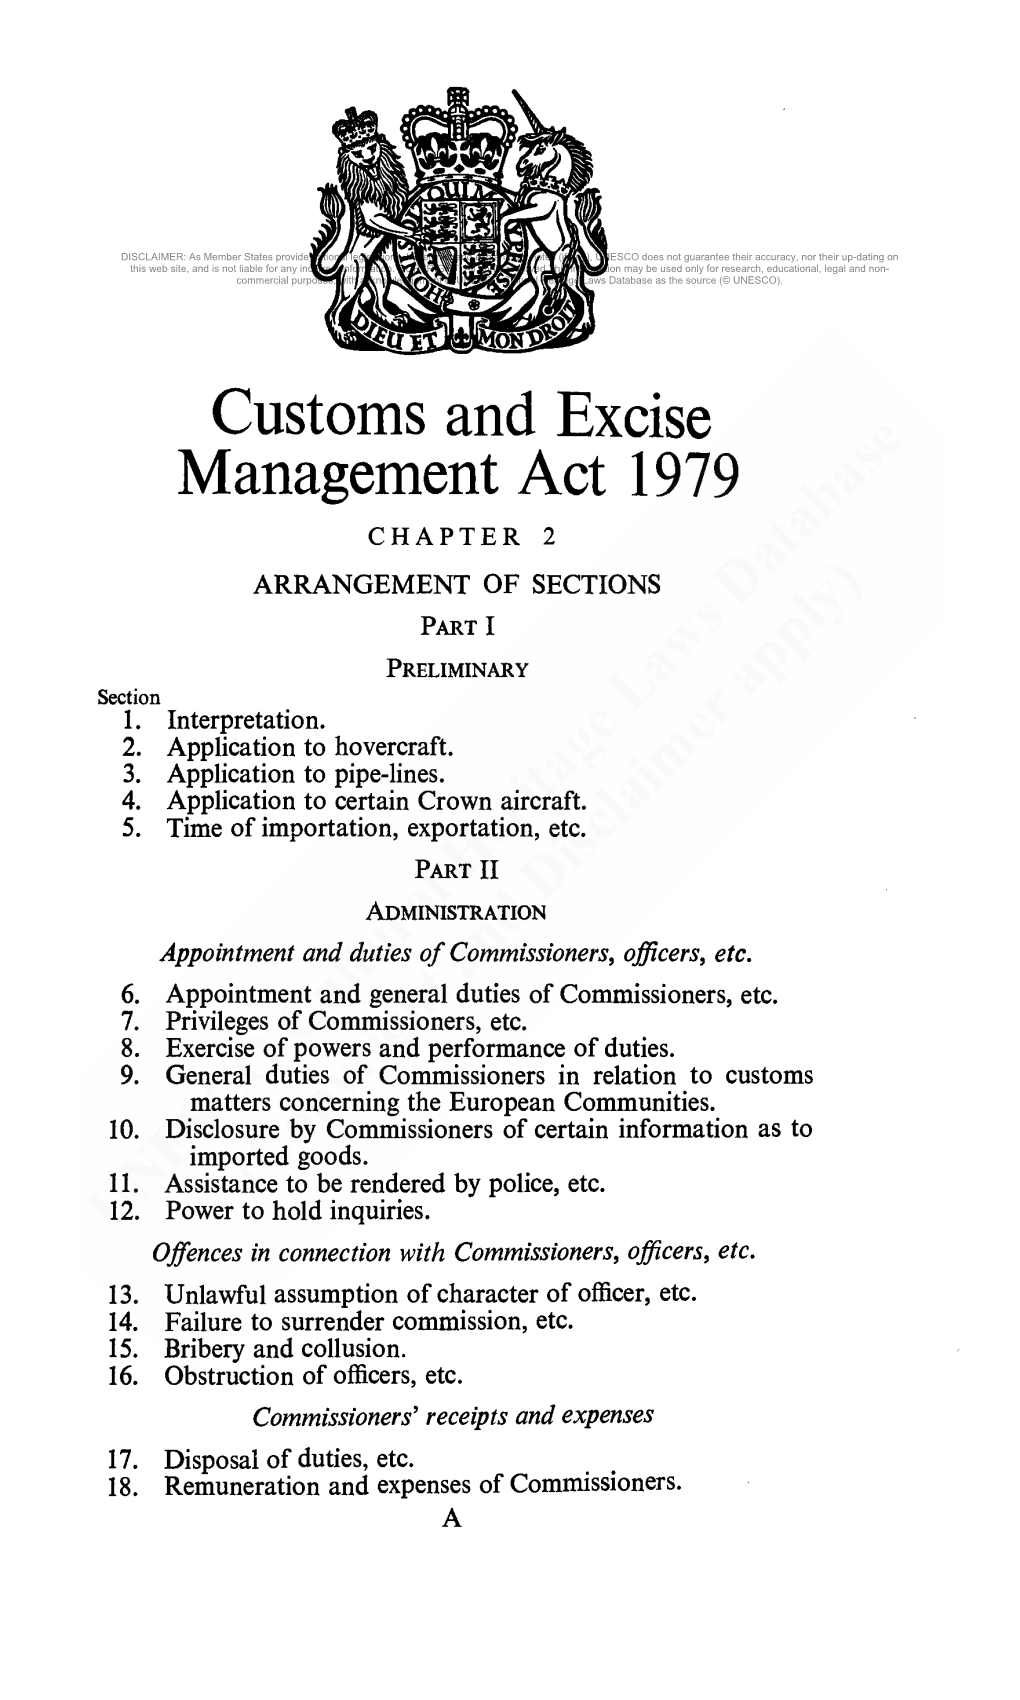 Management Act 1979 CHAPTER 2 ARRANGEMENT of SECTIONS PART I PRELIMINARY Section 1